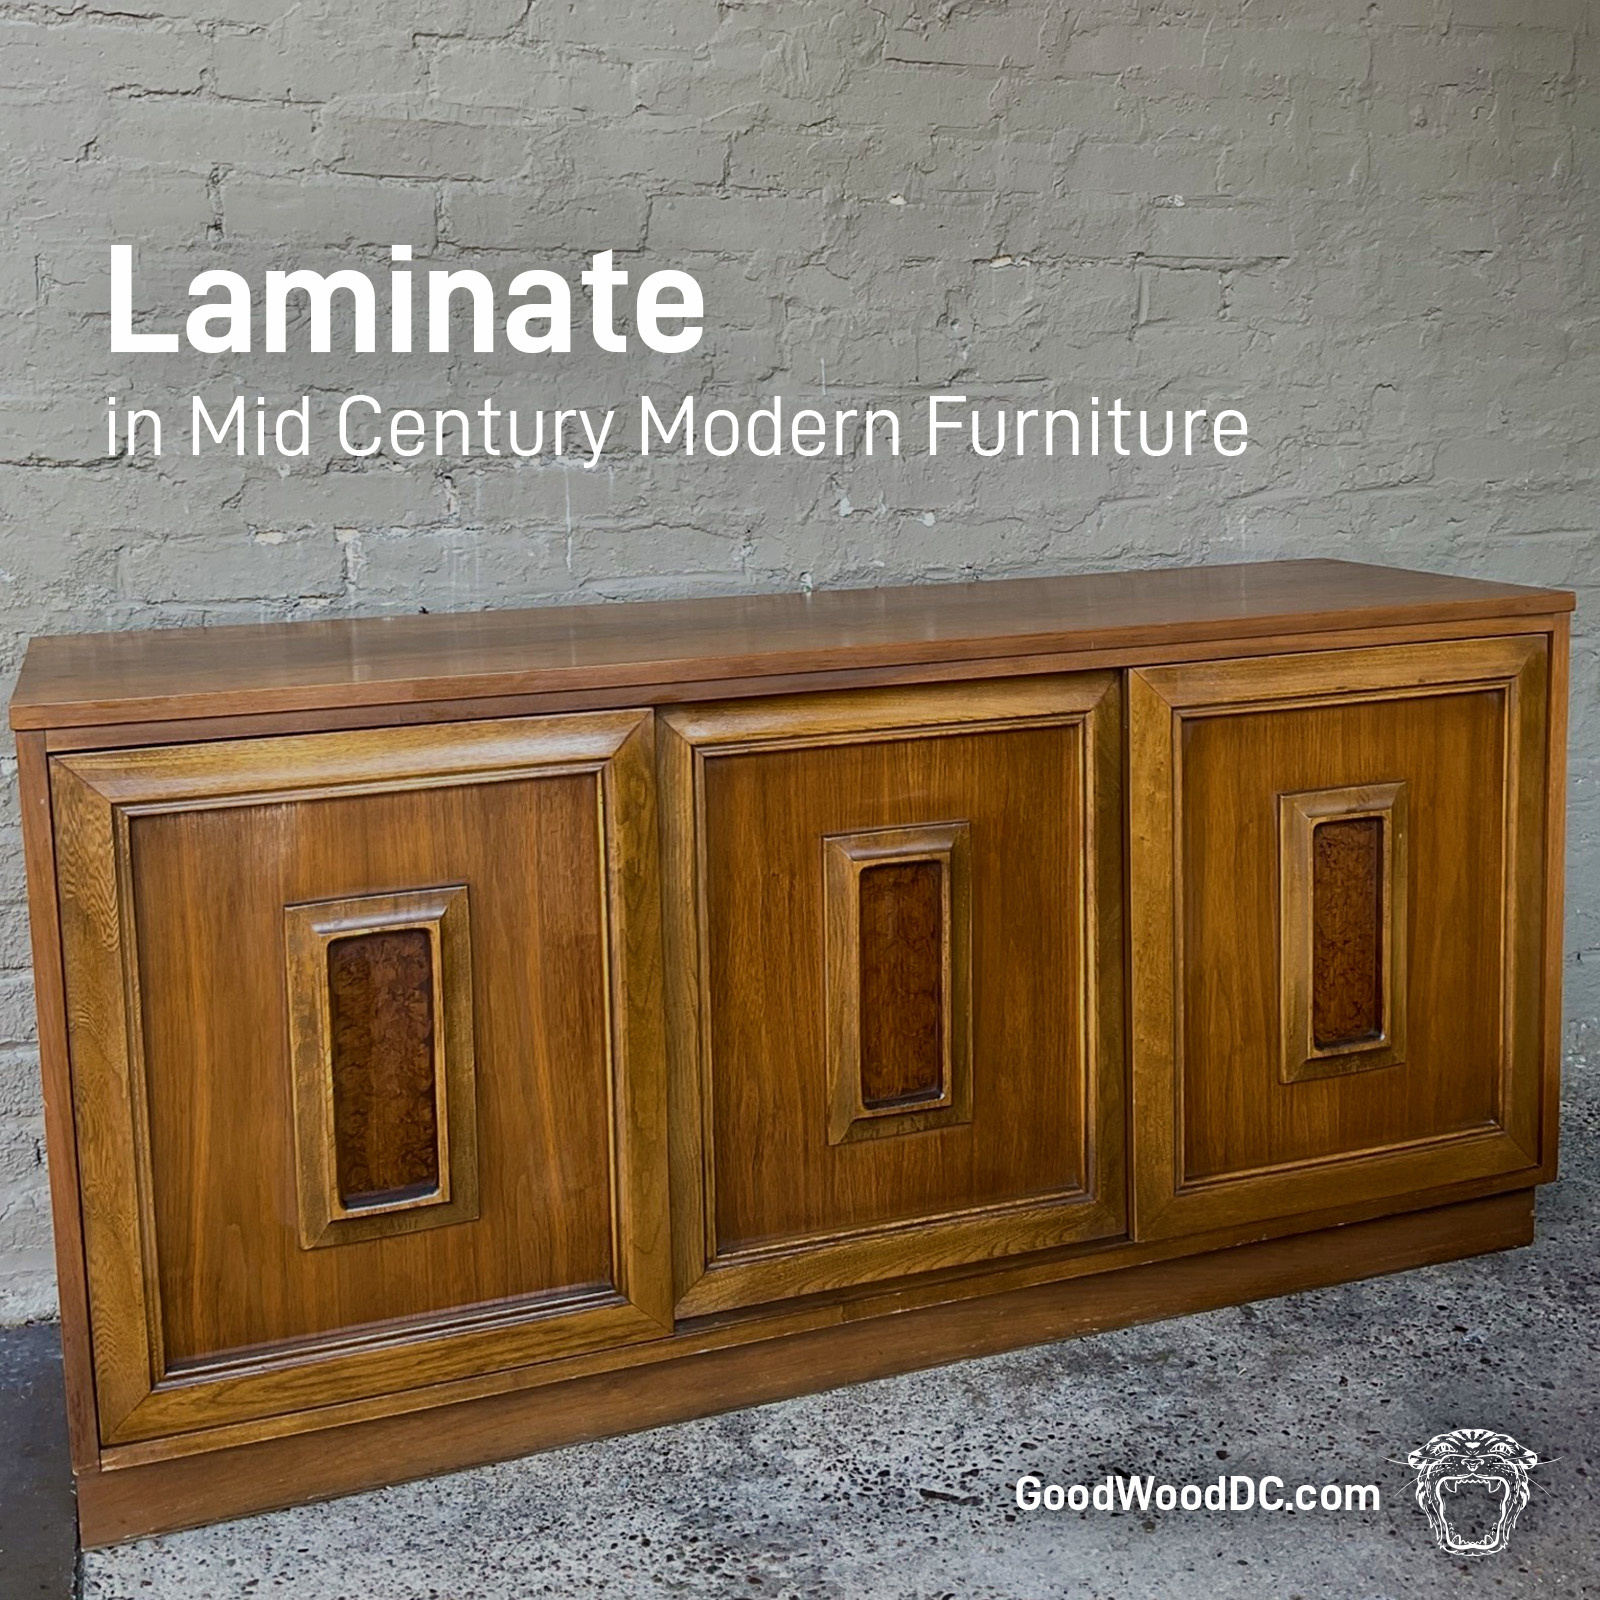 Is Laminate in Mid-Century Modern Furniture a Sign of Low-Quality?